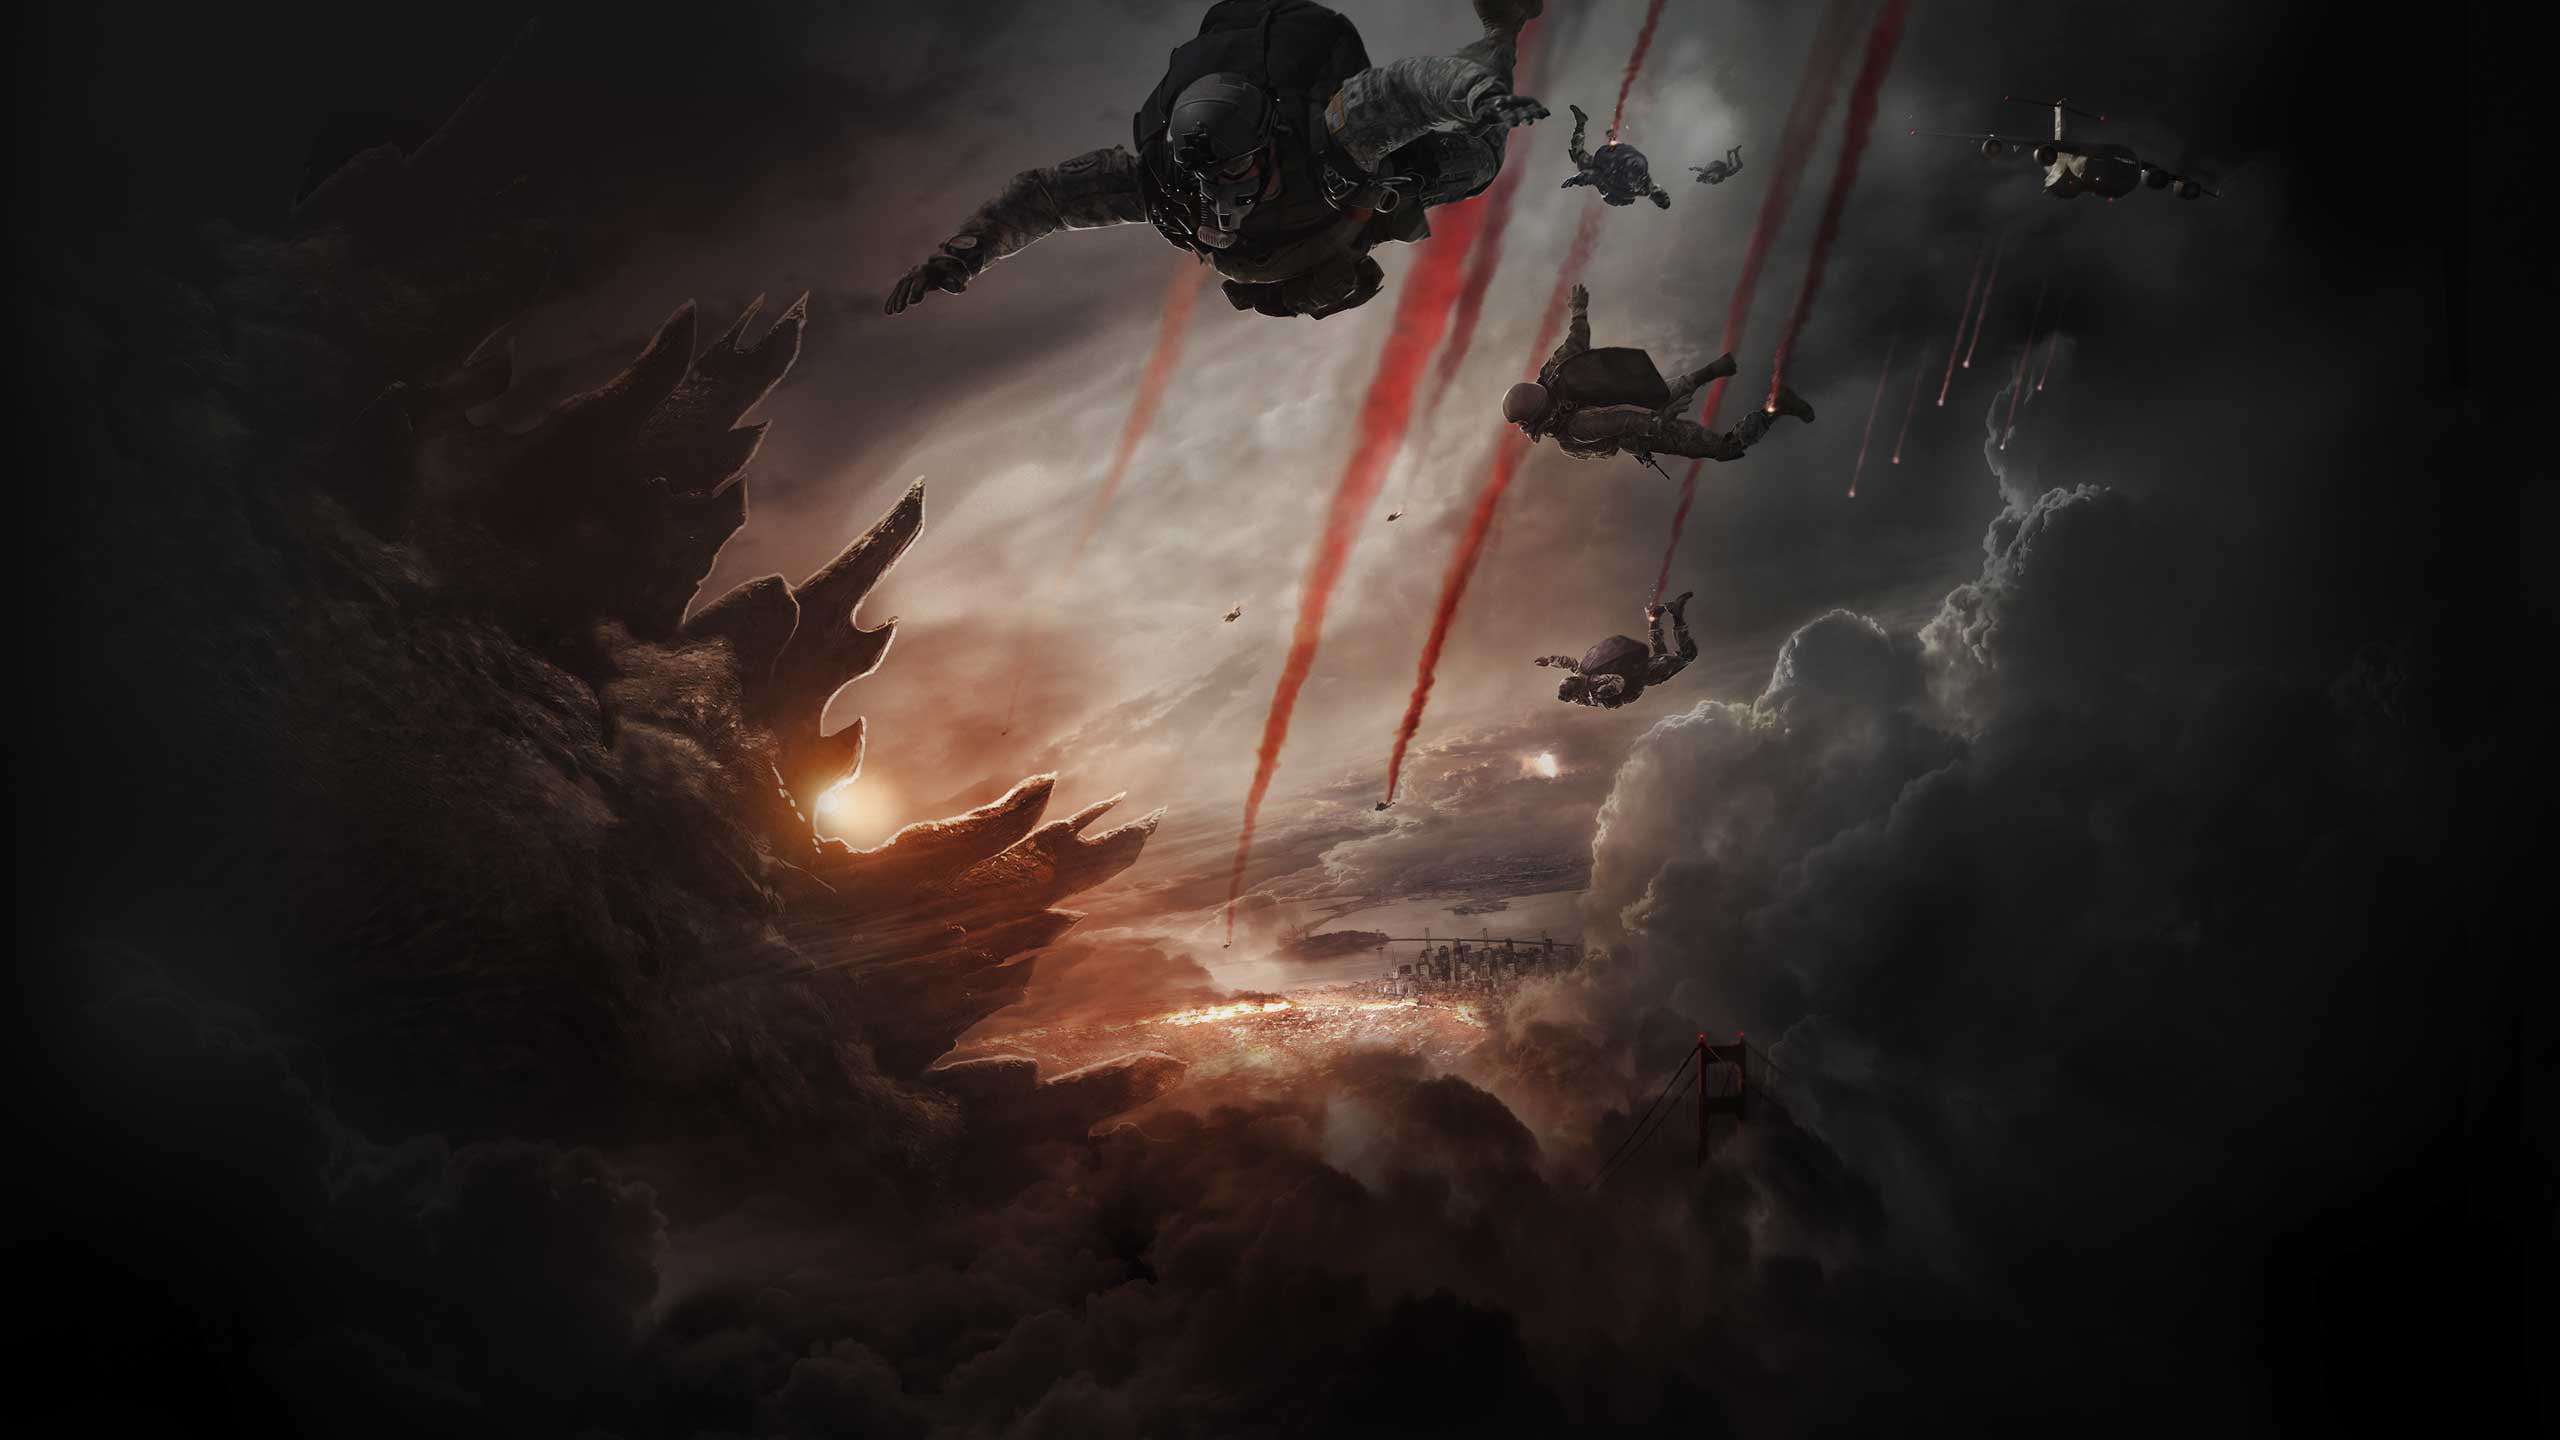 Godzilla Monster Giant Paratrooper Skydive Fall Flare Clouds HD, men falling from sky game illustration